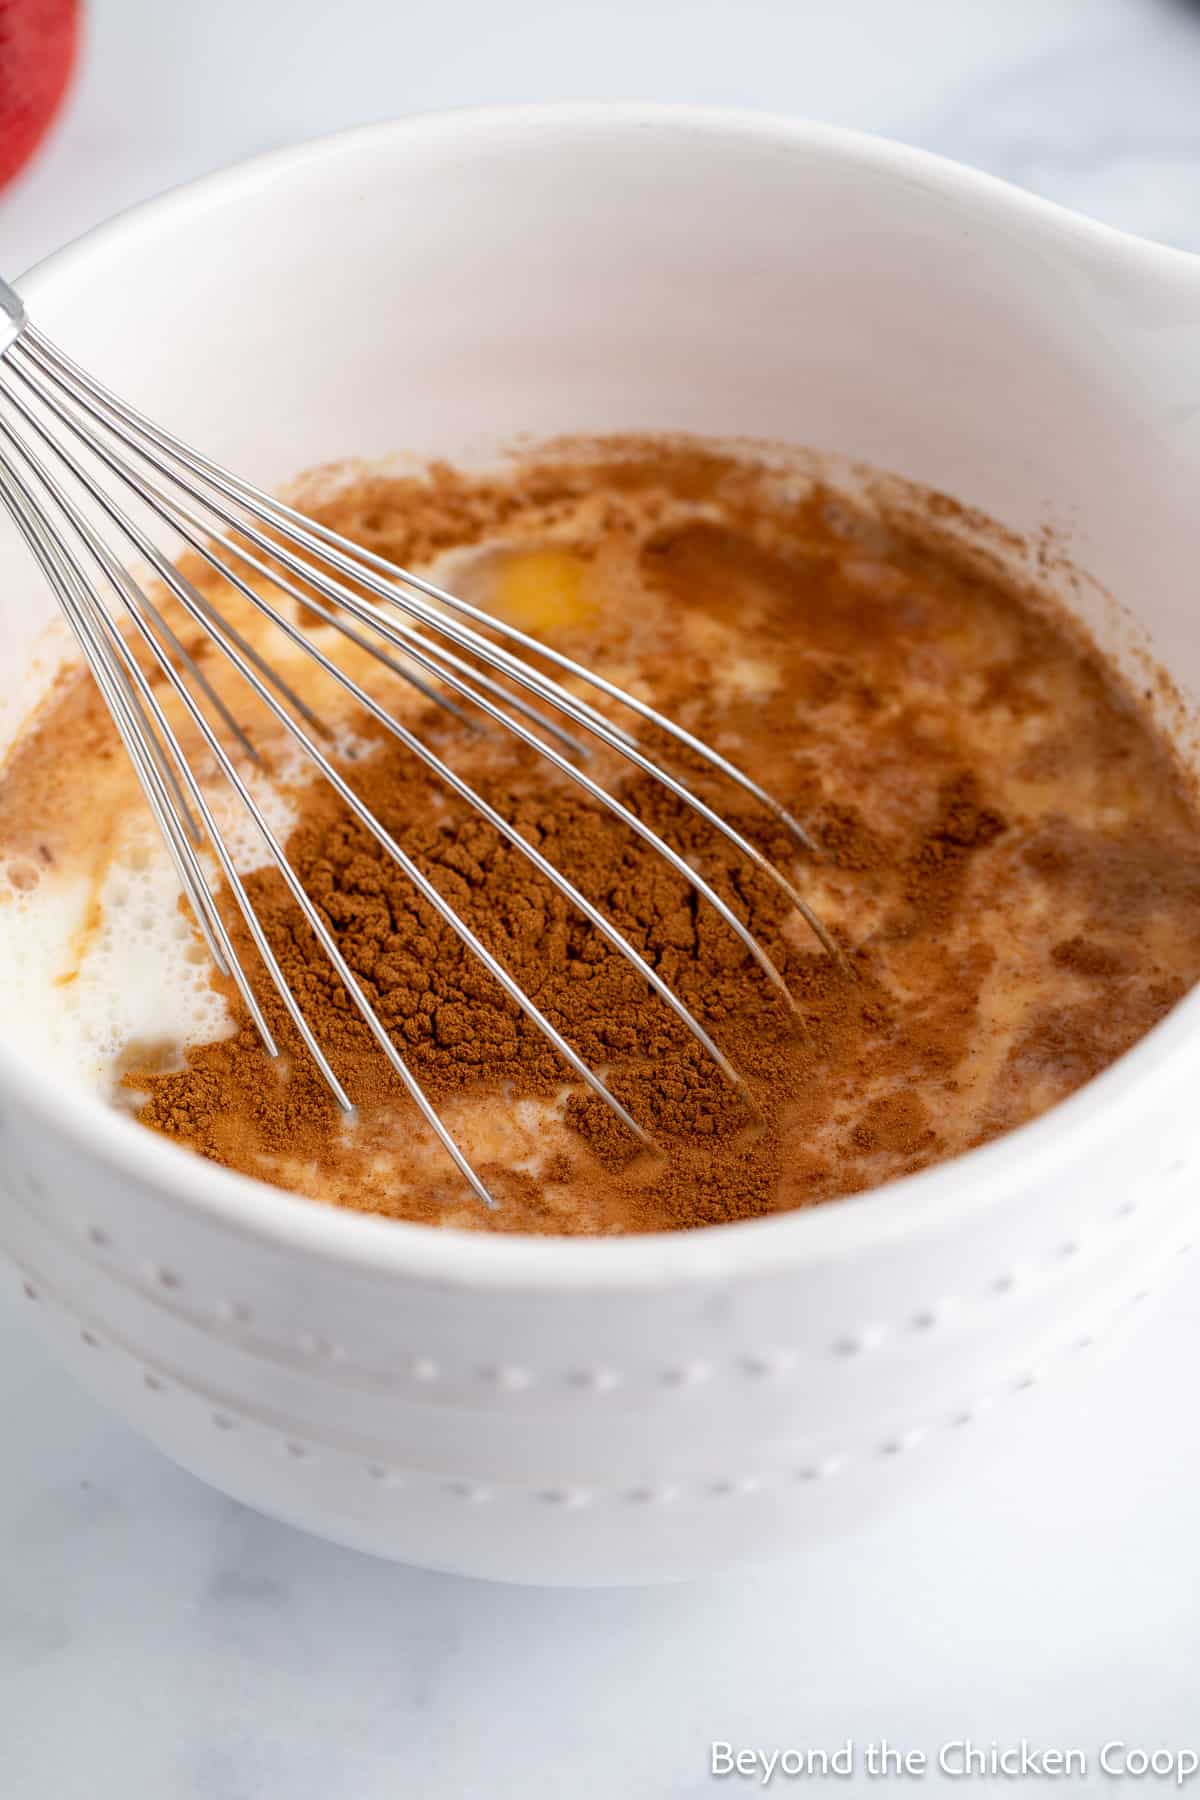 A bowl filled with eggs, milk and cinnamon.